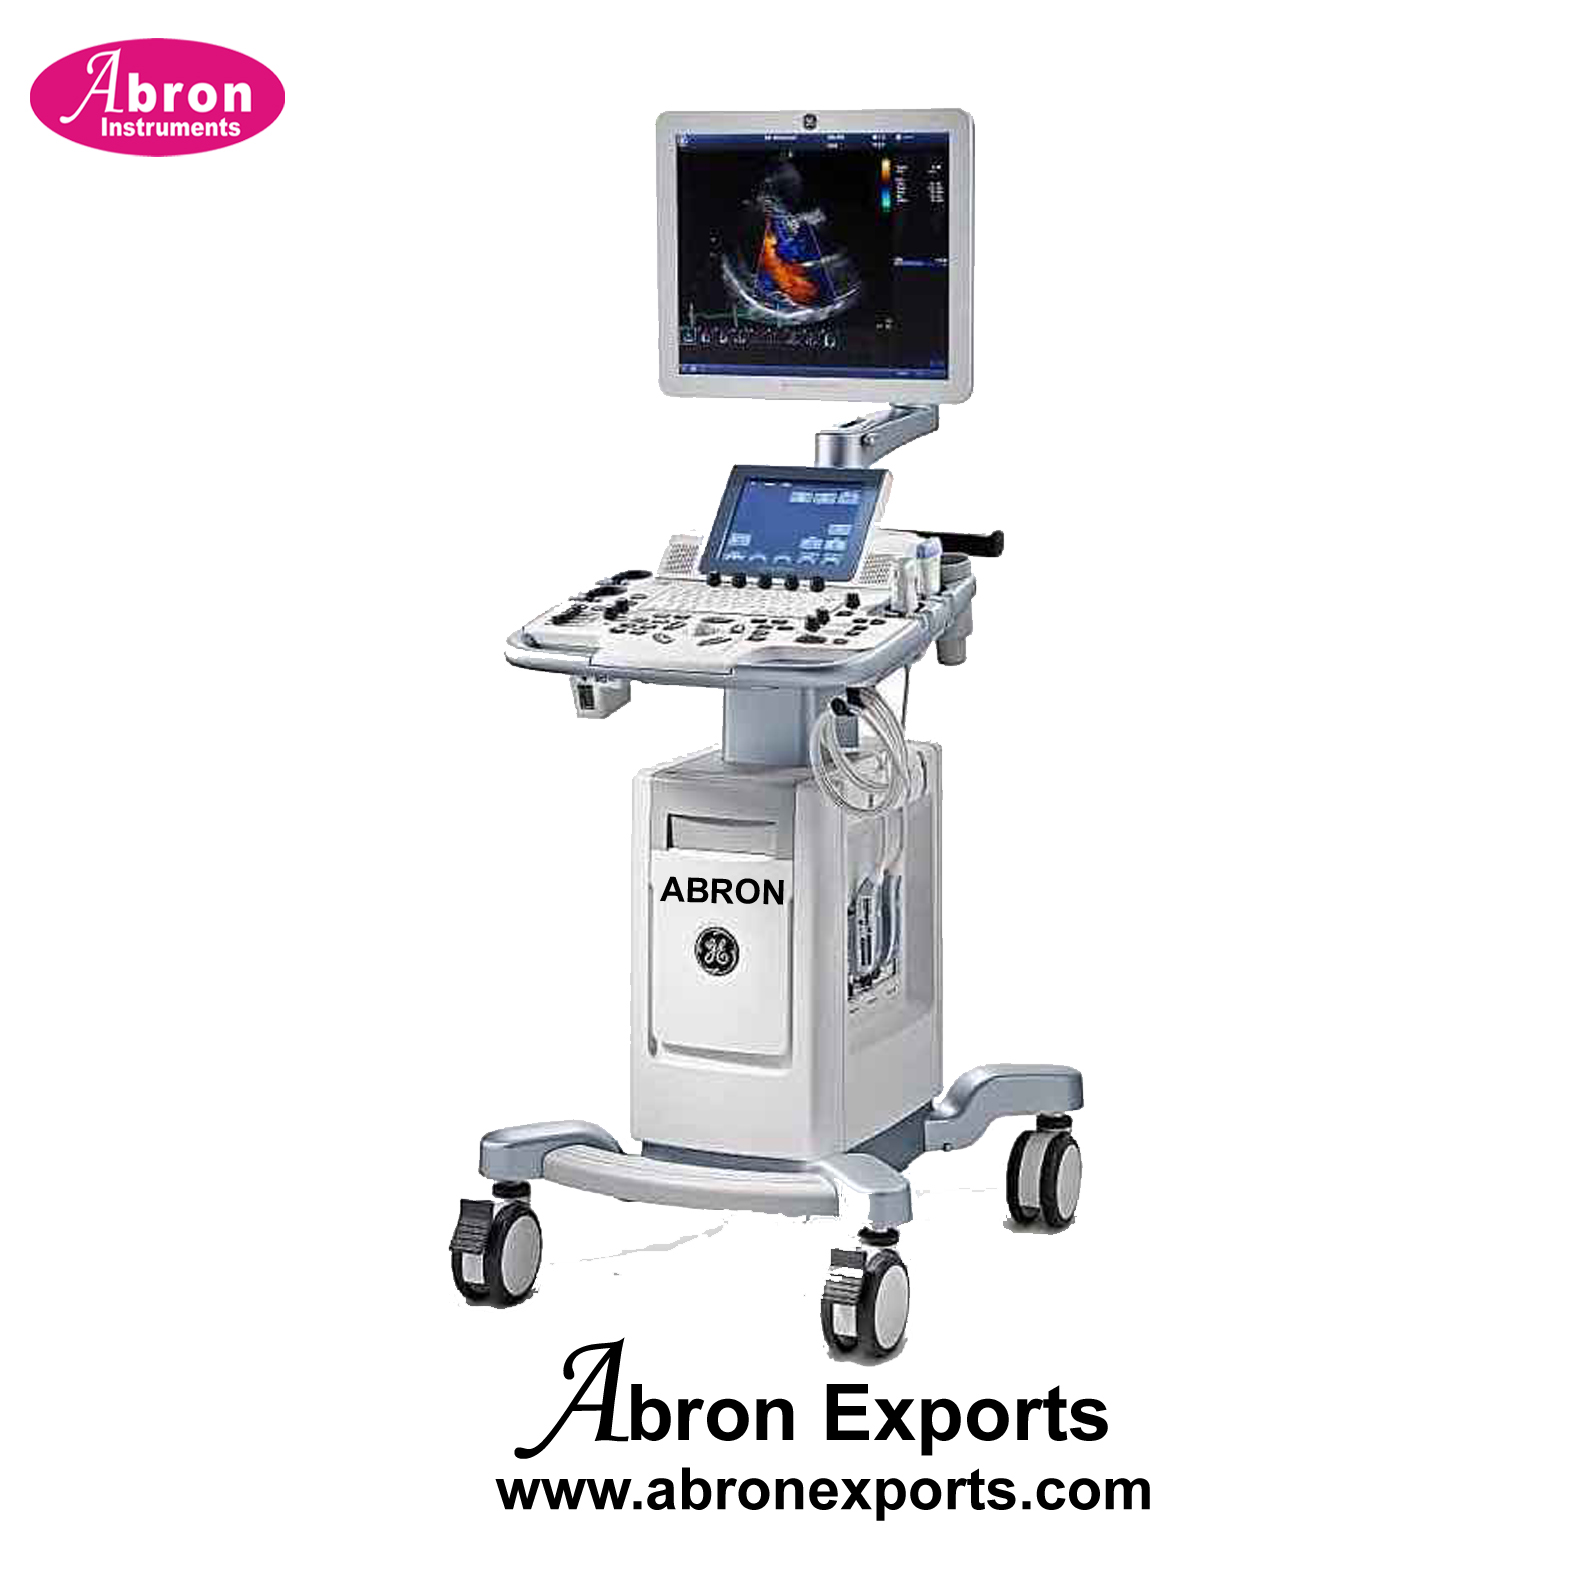 Echocardiography Ultrasound scanner Cadiac colour Sonography with TEE GET8 trolley Transesophageal Hospital Abron ABM-2505GET 